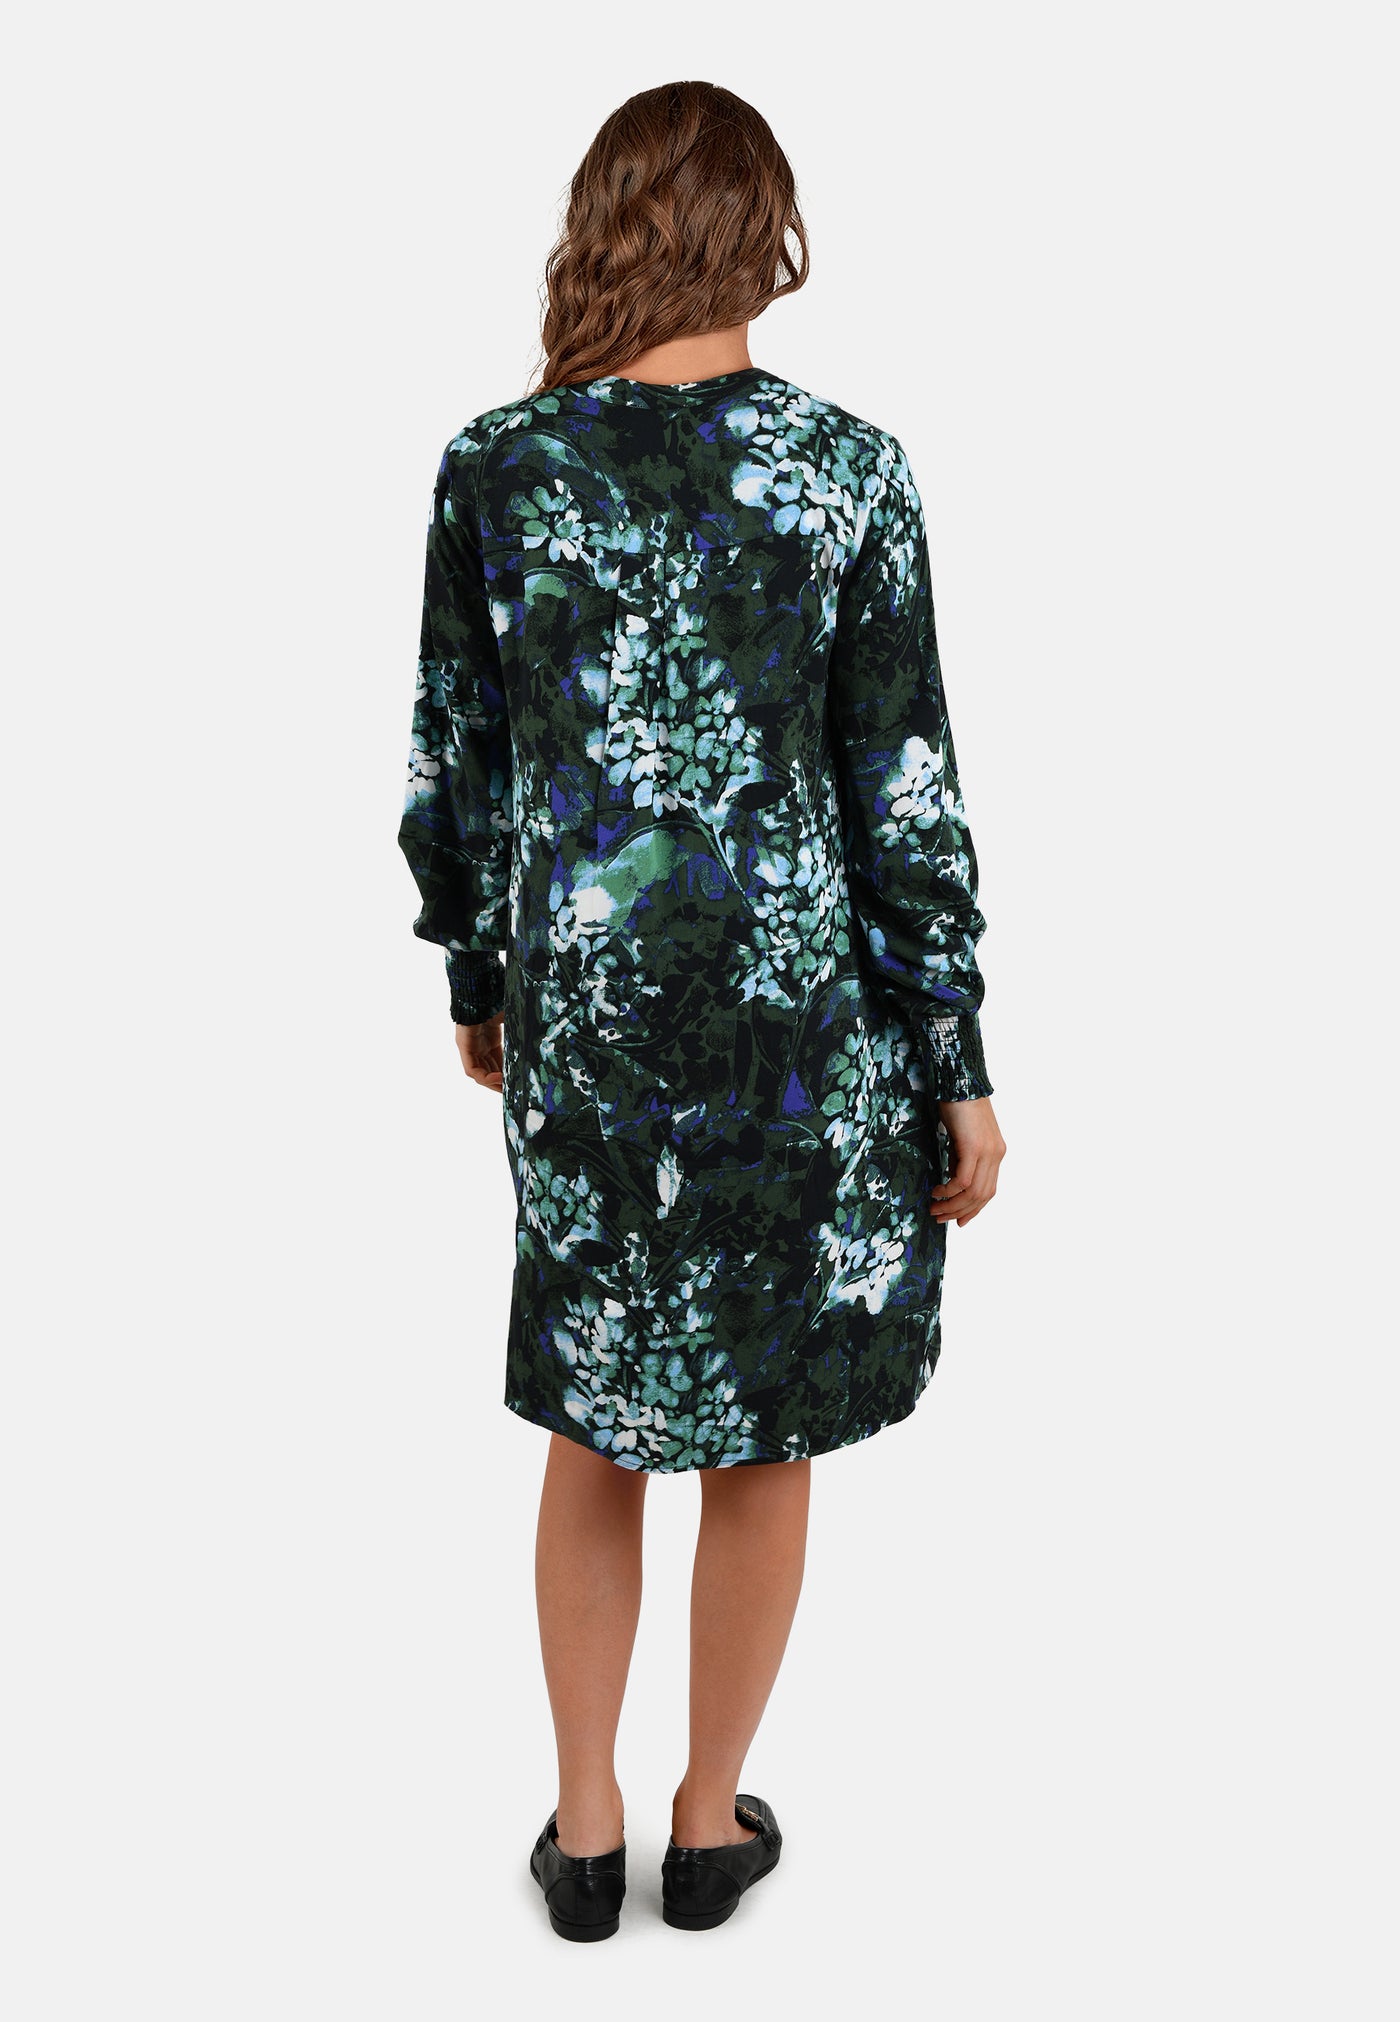 Printed A-Line Dress with Long Sleeves. FINAL SALE